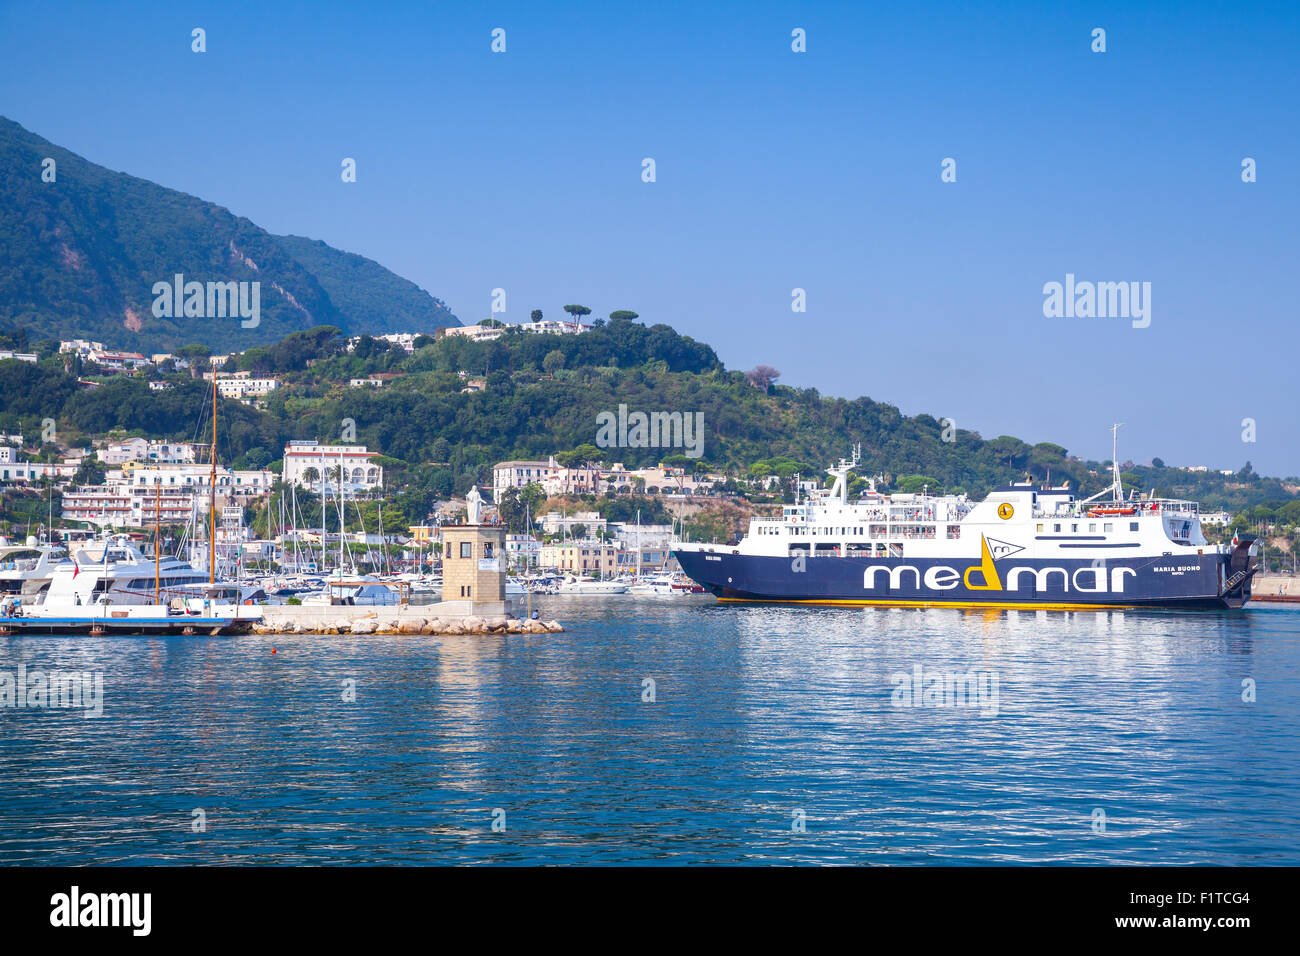 Casamicciola Terme, Italy - August 14, 2015: Maria Buono passenger ferry, operated by Madmar enters the port of Casamicciola Ter Stock Photo